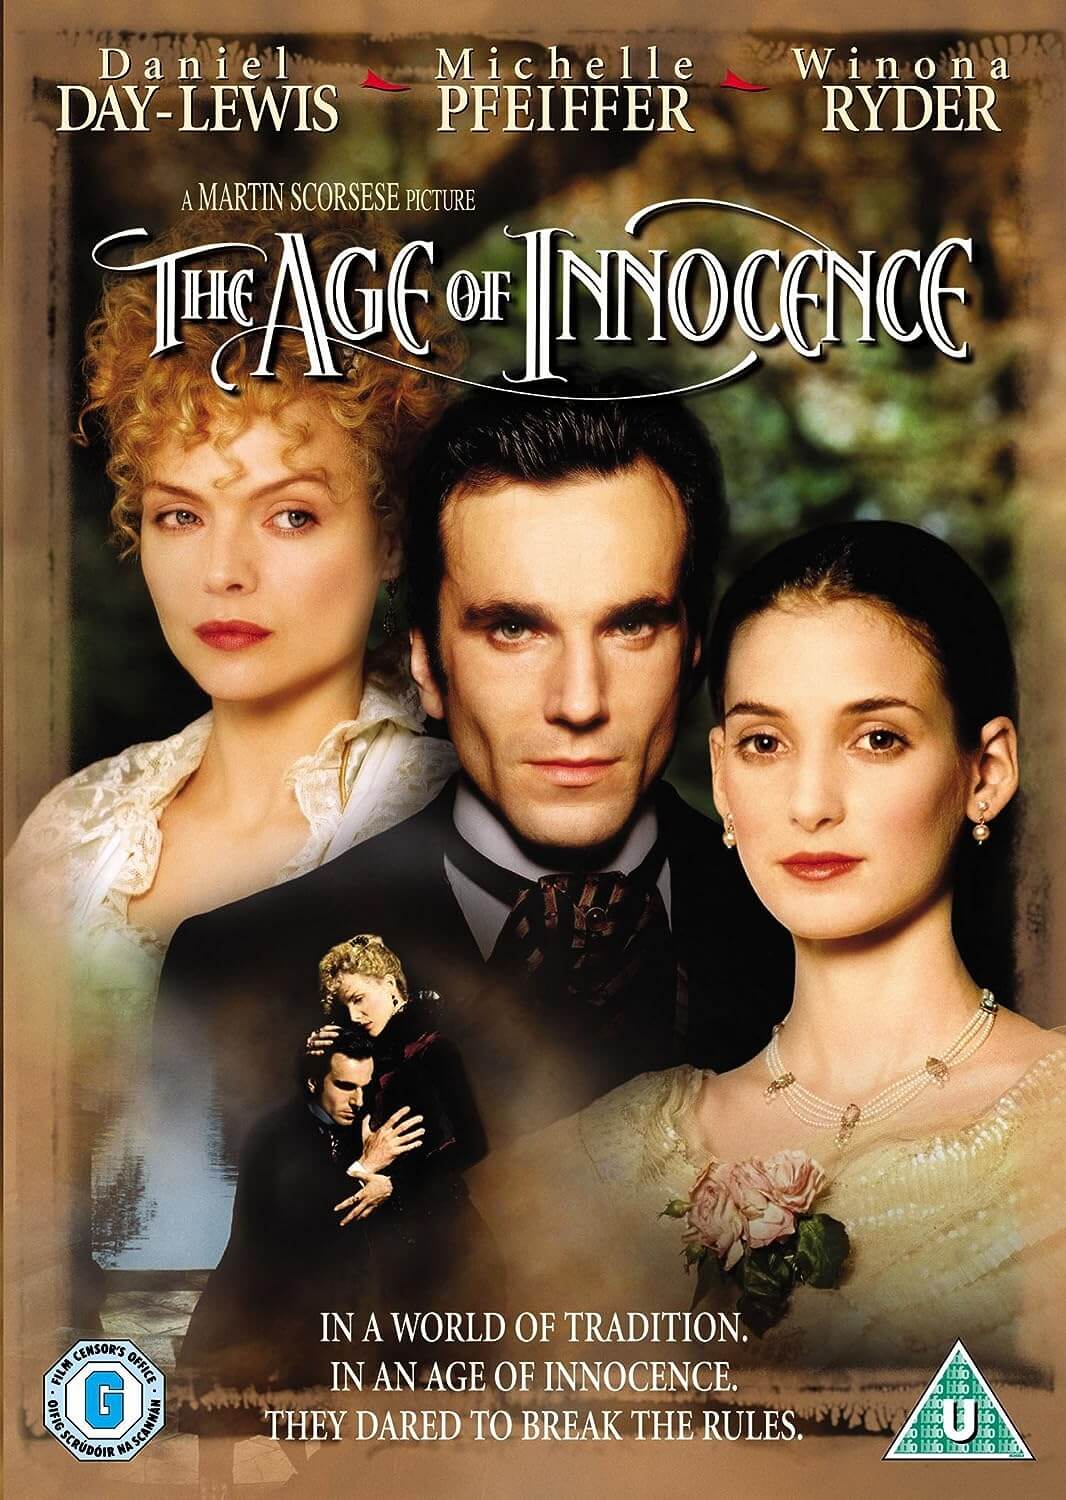 “The Age of Innocence” (1993)